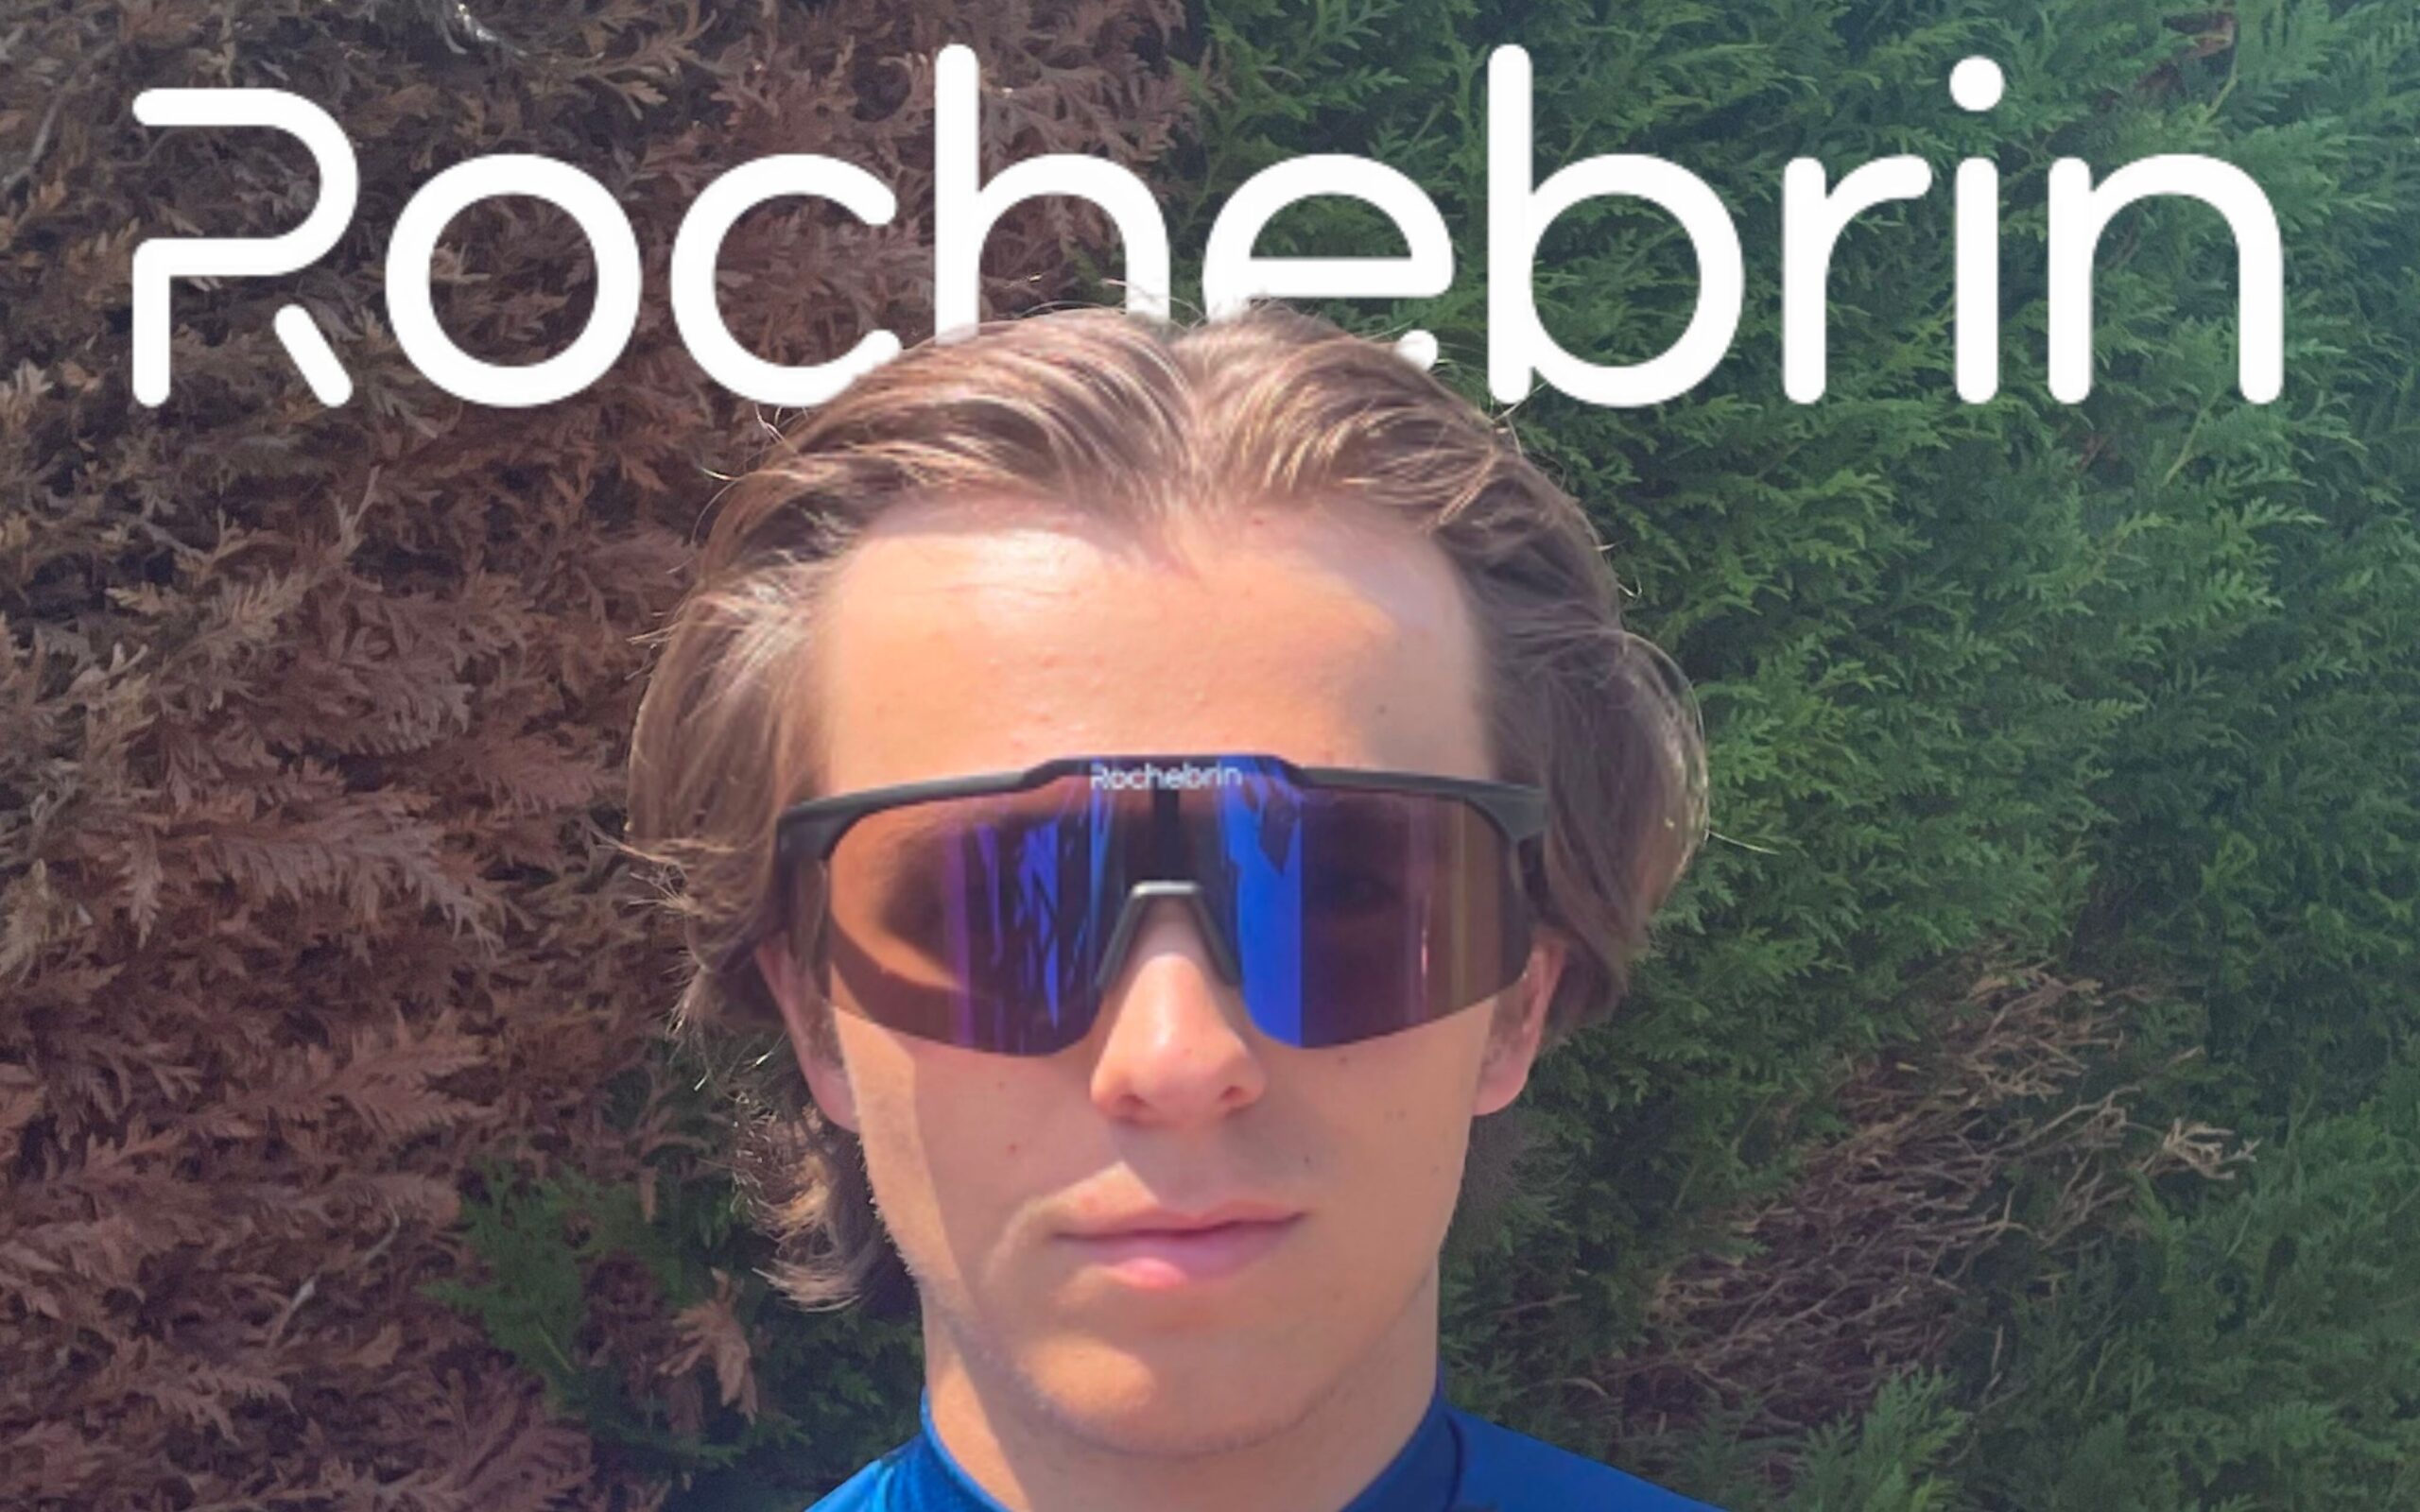 You are currently viewing Test des lunettes de cyclisme Rochebrin